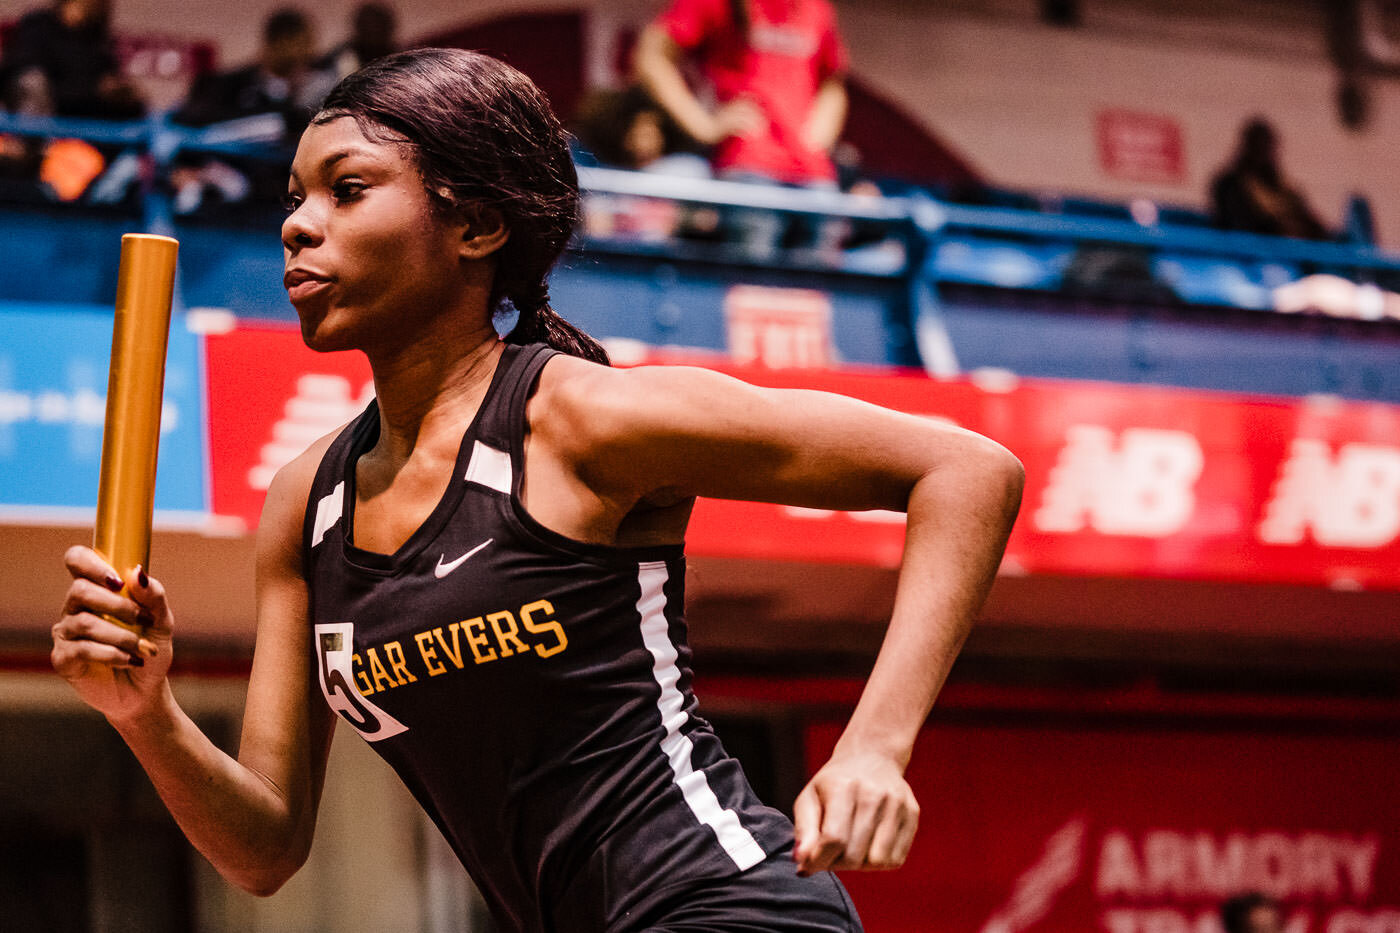 Armory Track NYC CUNYAC Track and Field Championship 2020